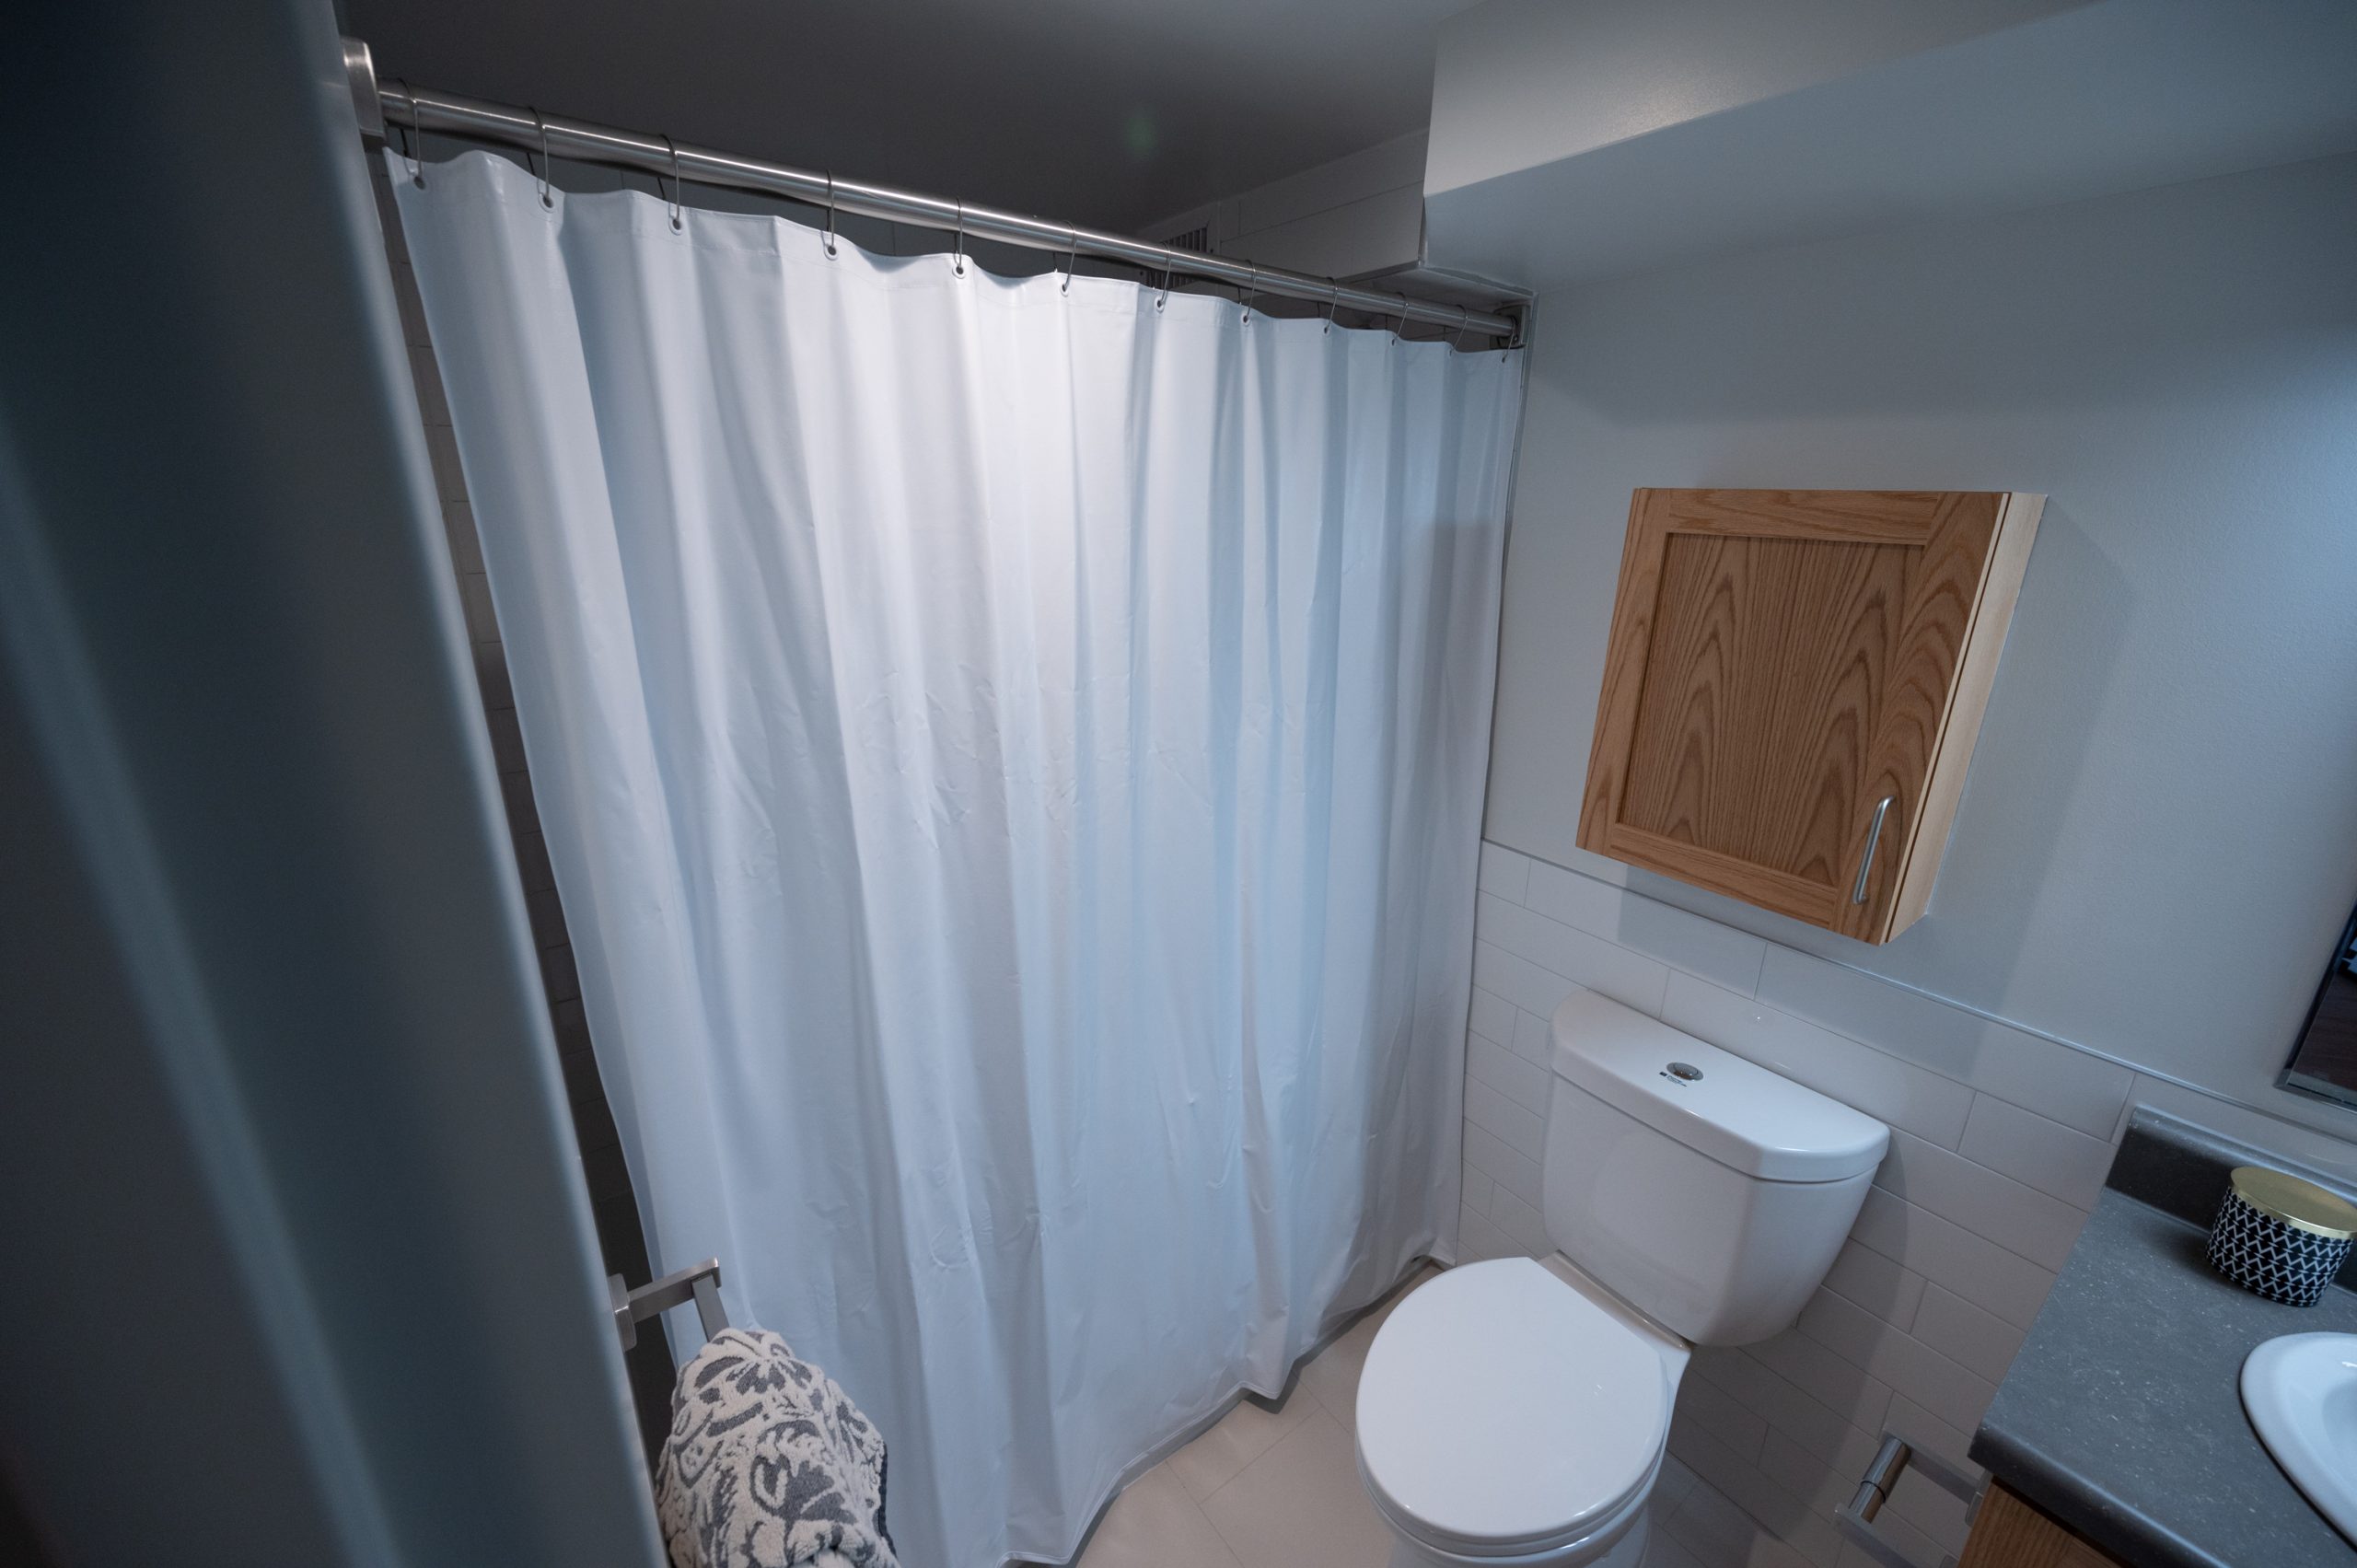 Shower curtain and toilet in bathroom of 389 Church St. unit